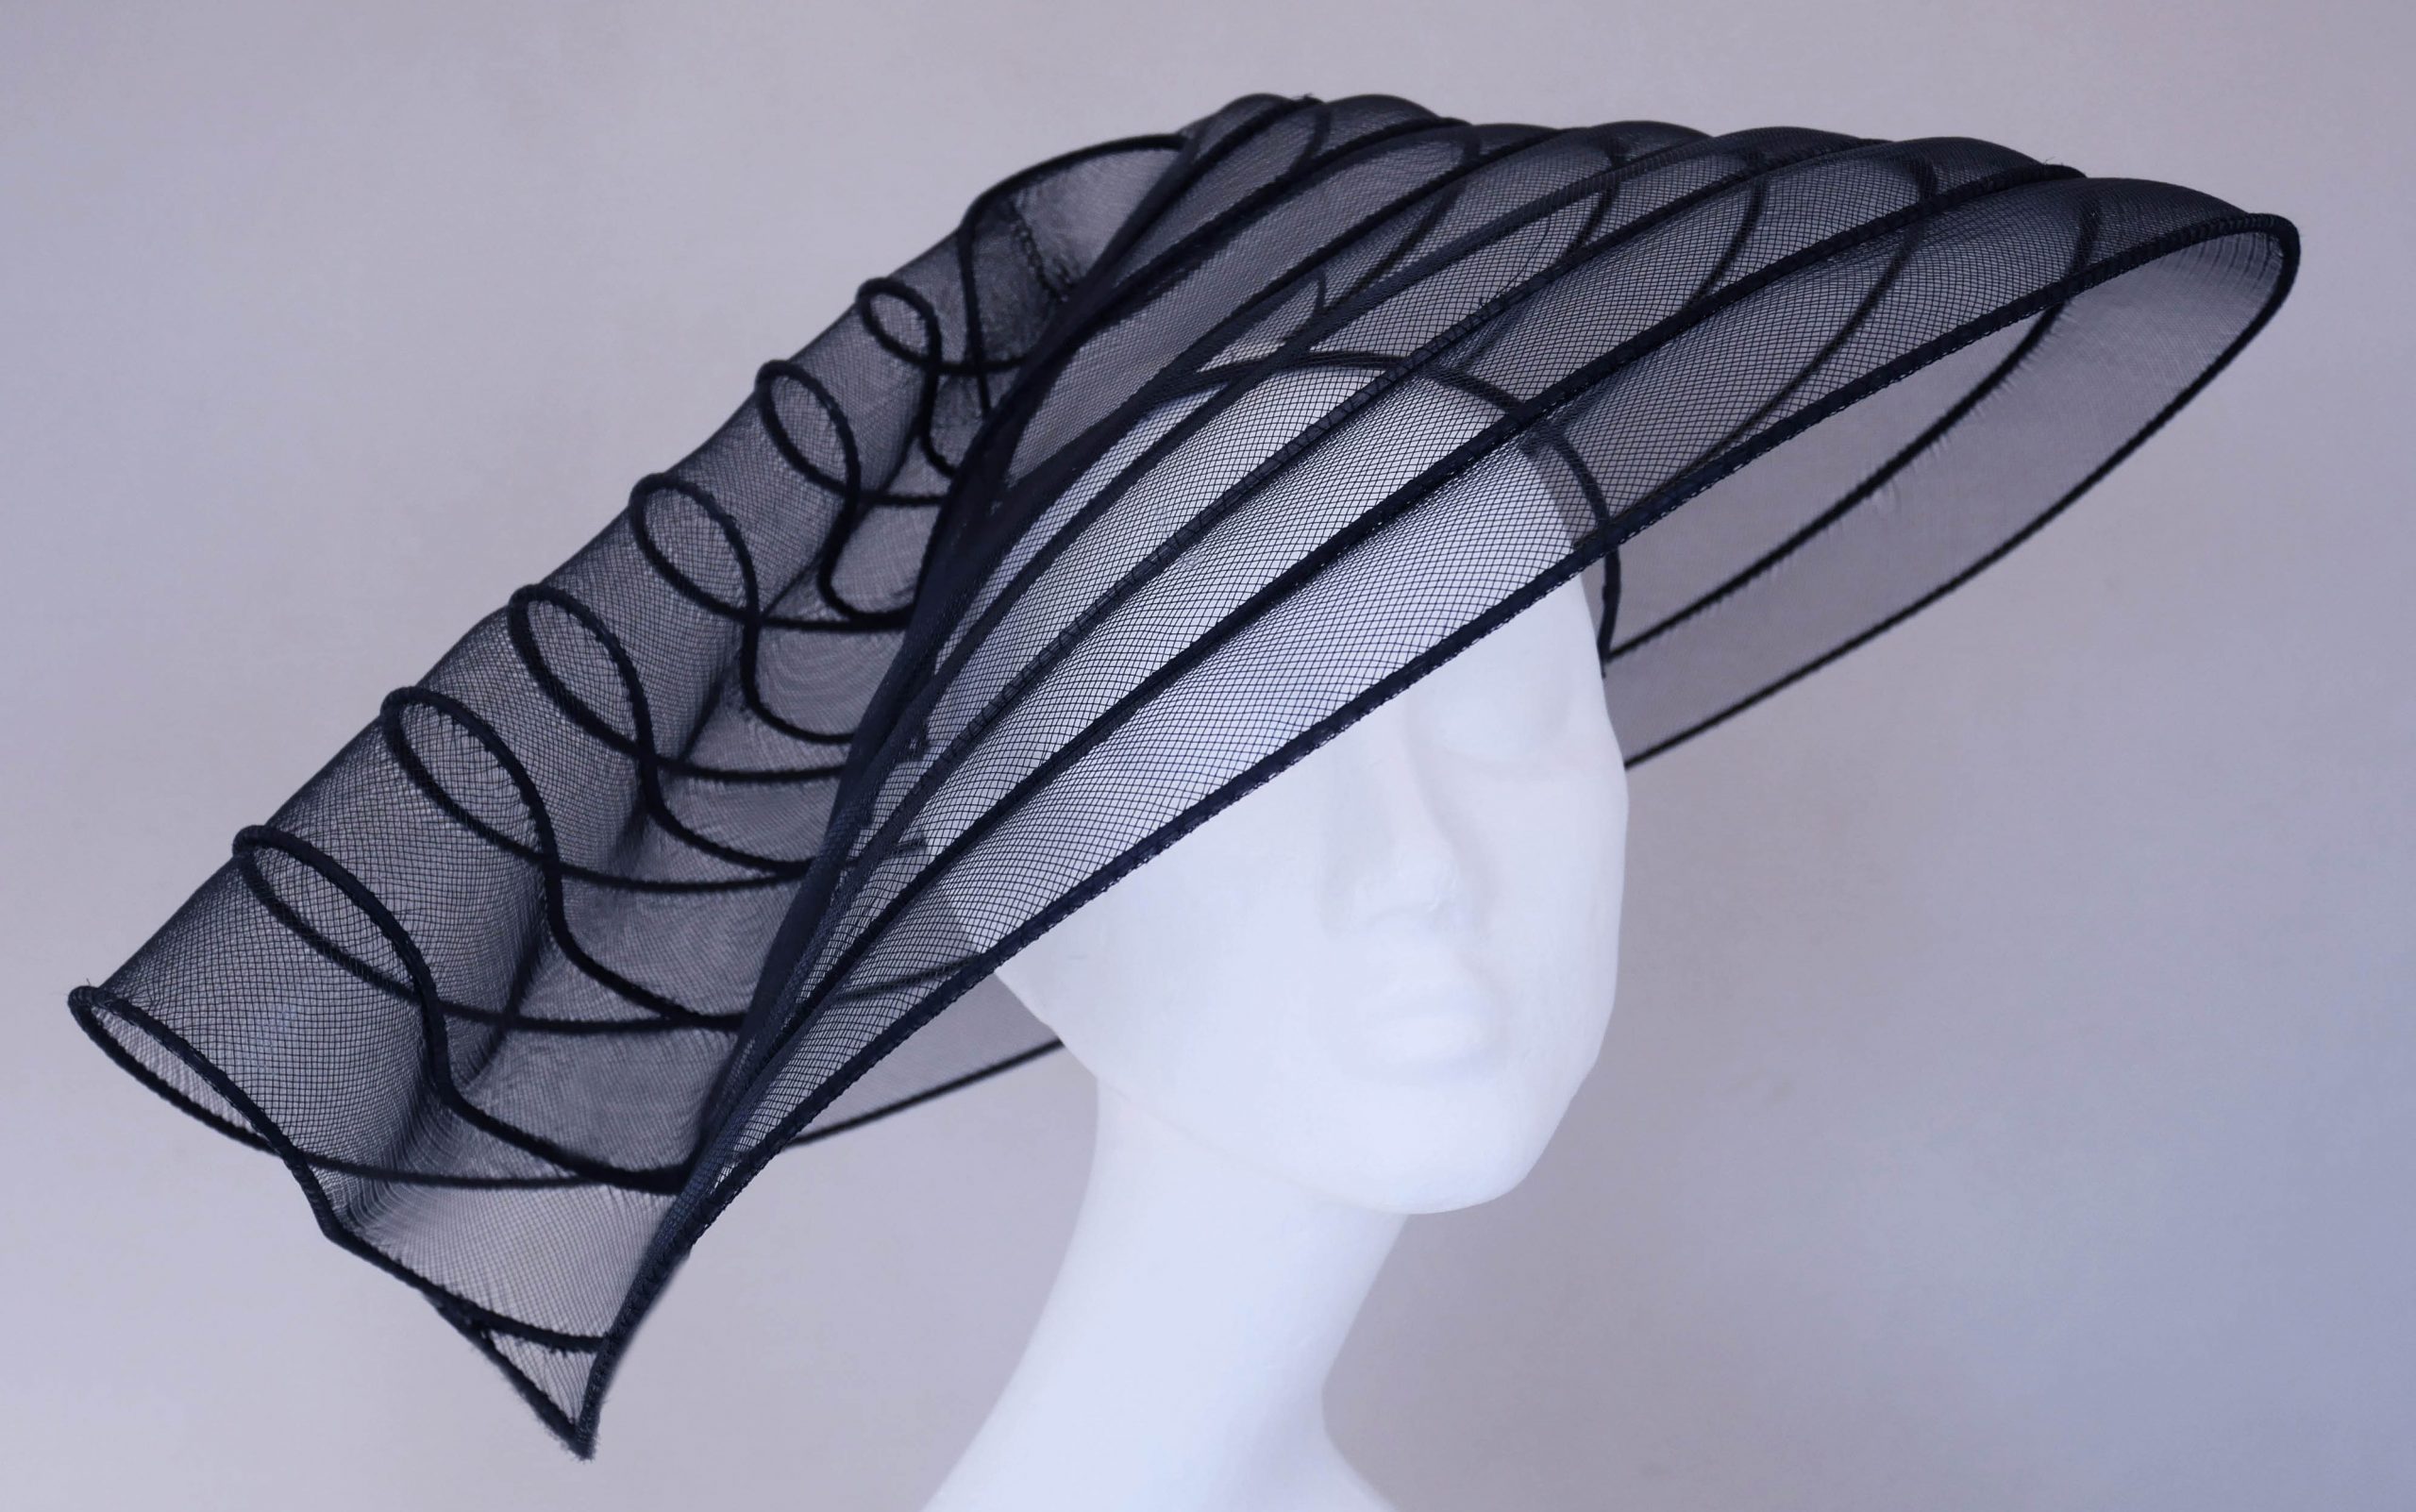 Hat by student Anna Stefanou